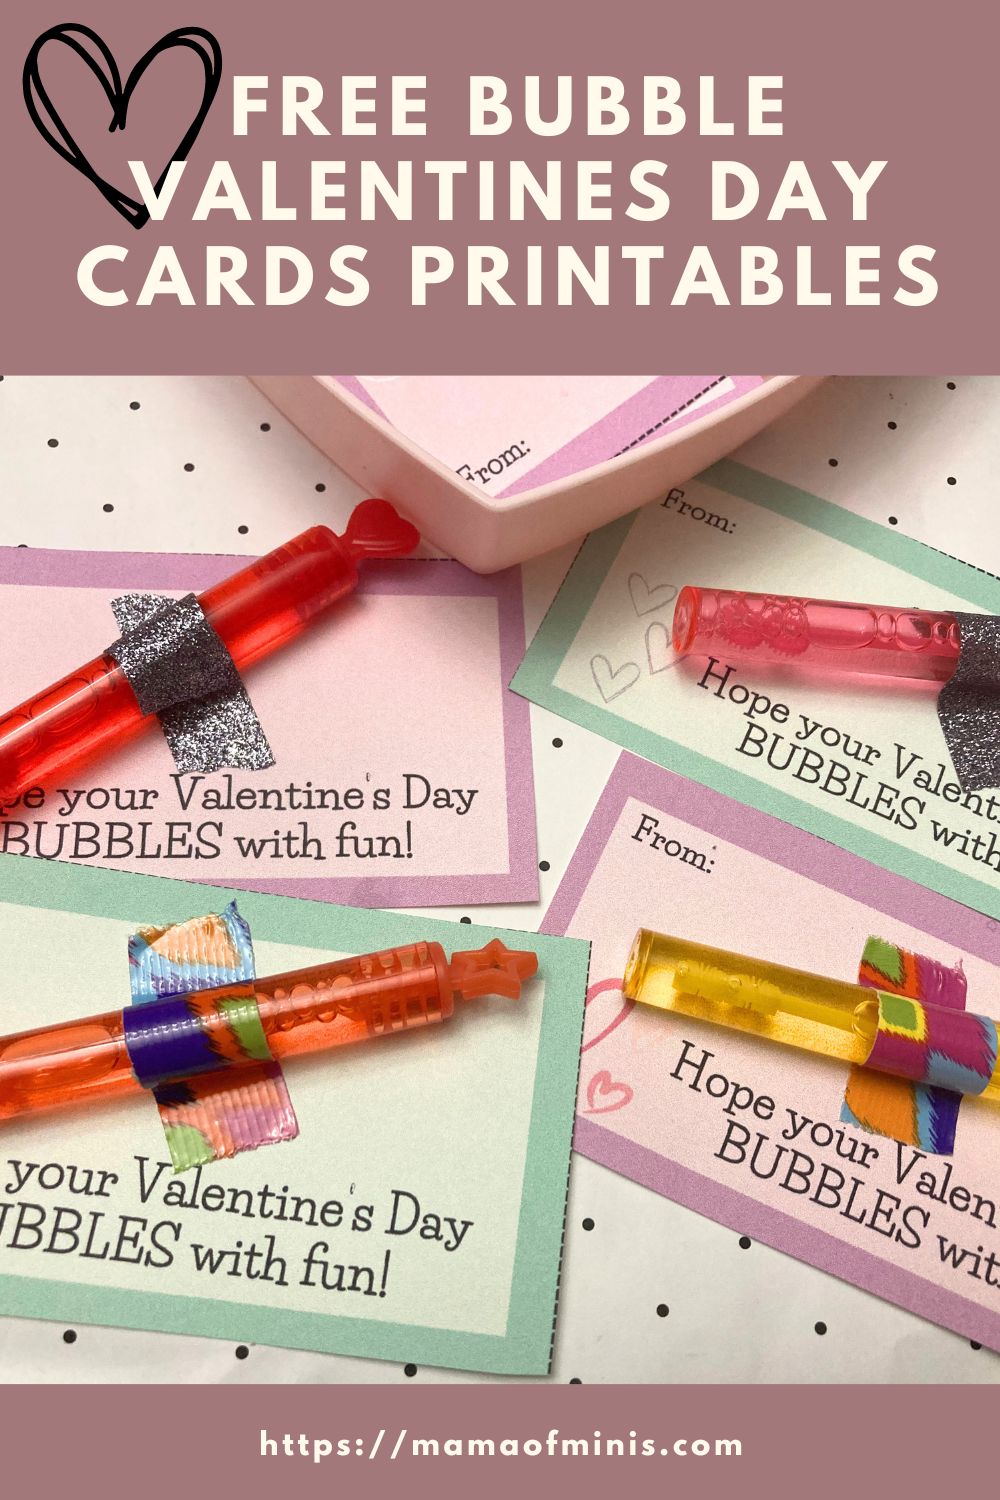 Free Bubble Valentines Day Cards Printables